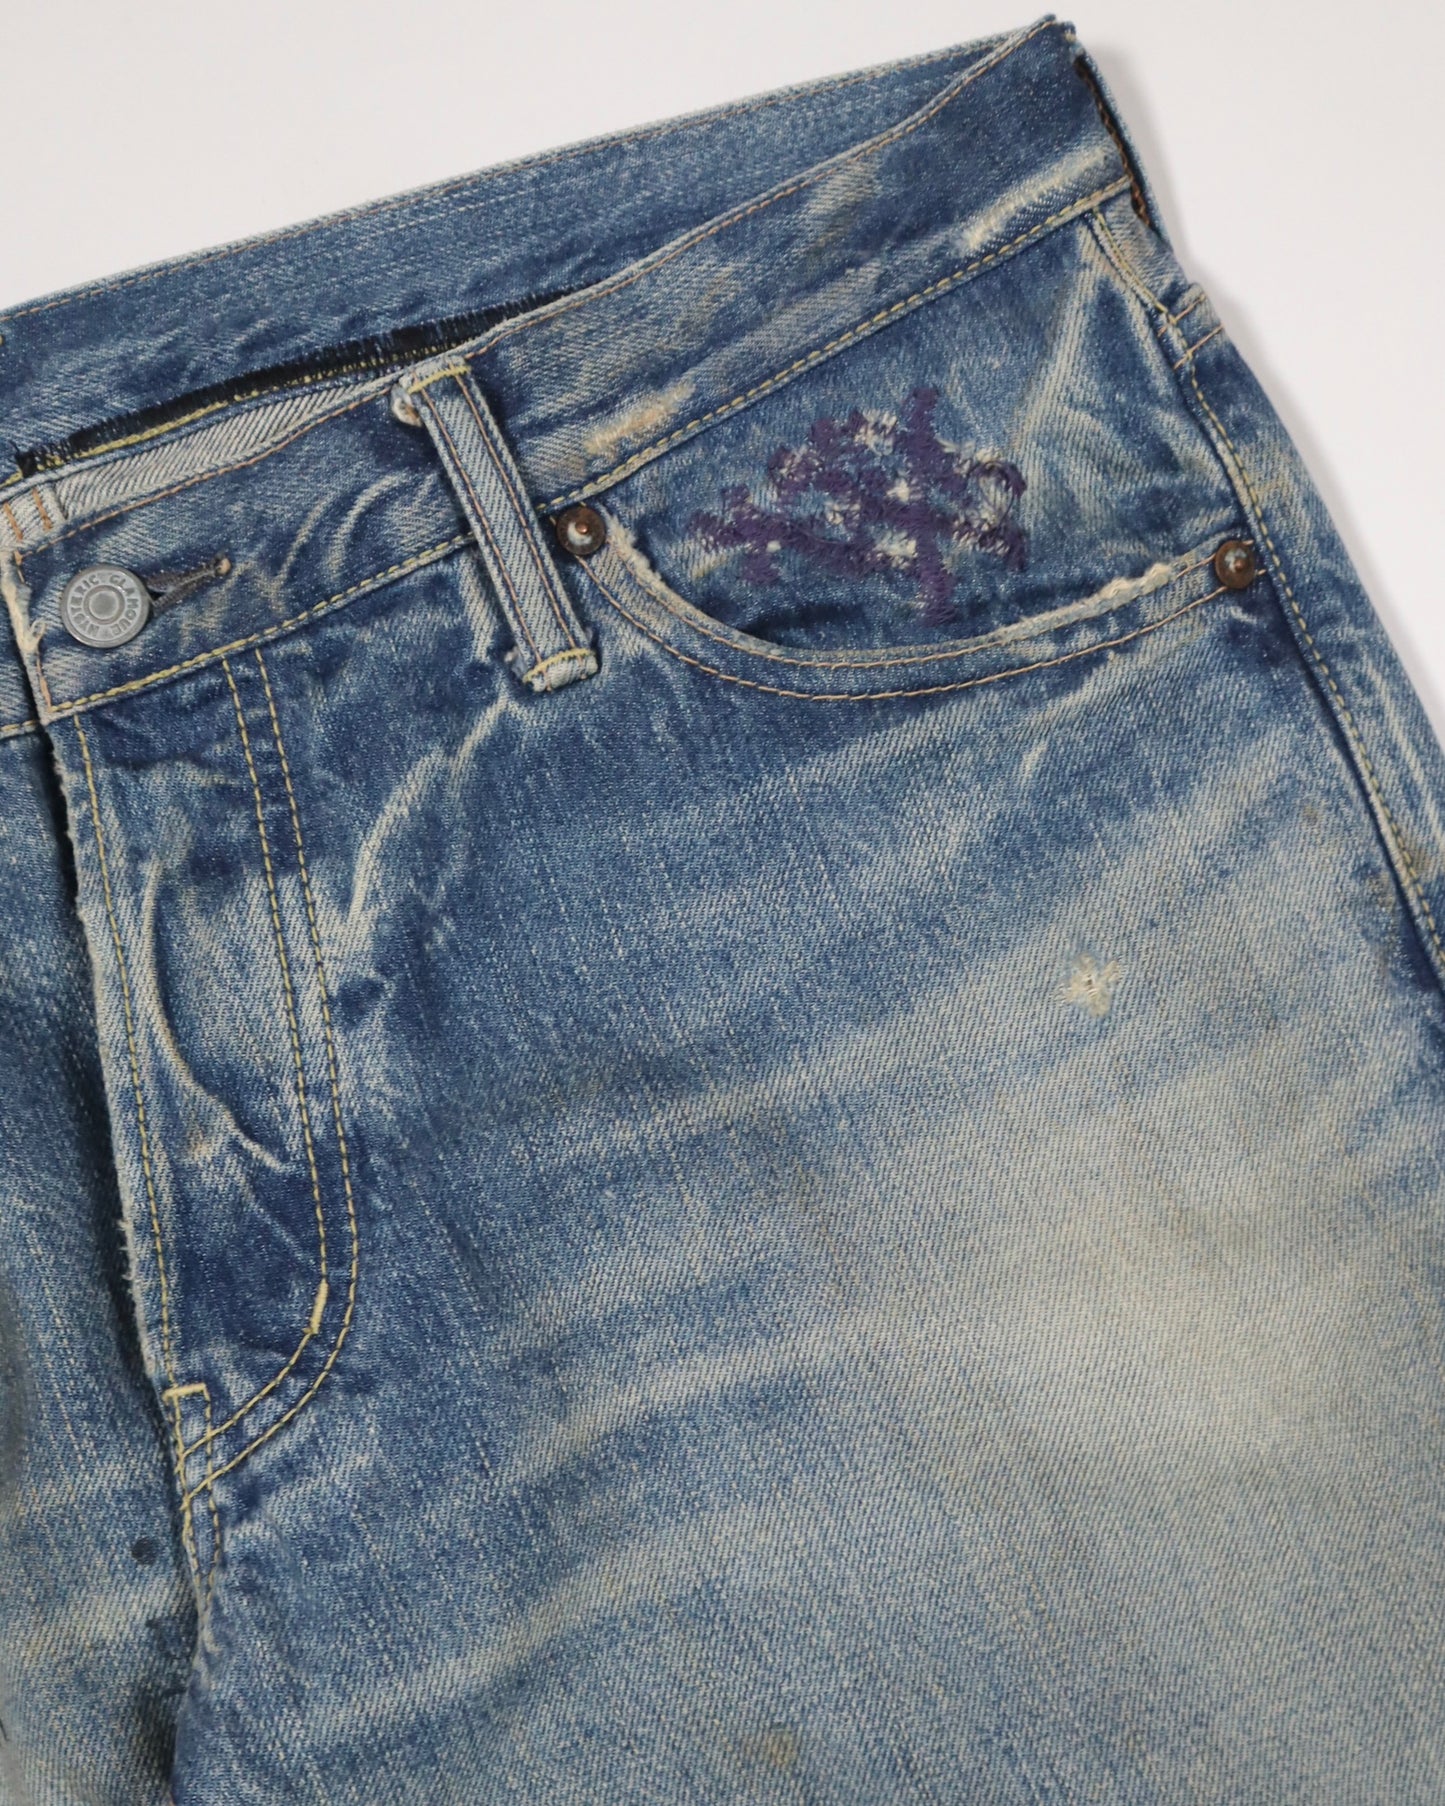 Hysteric Glamour 'Chaos Bringer' Bootcut Jeans